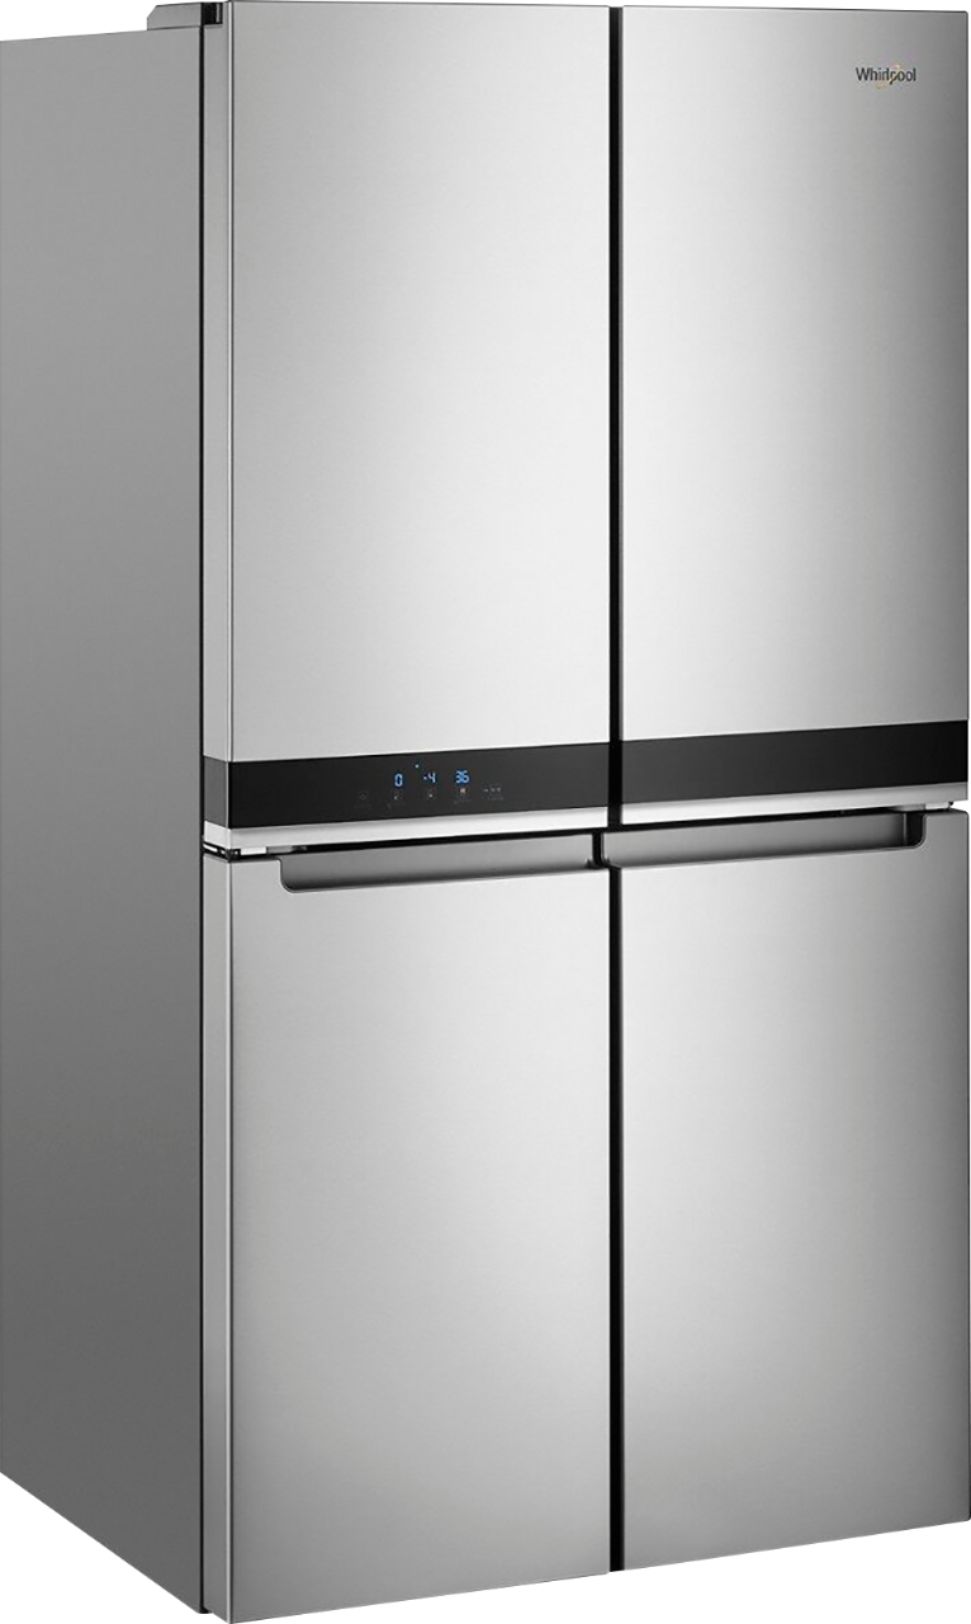 Angle View: Samsung - 23 cu. ft. Counter Depth Side-by-Side Refrigerator with WiFi and All-Around Cooling - Stainless steel